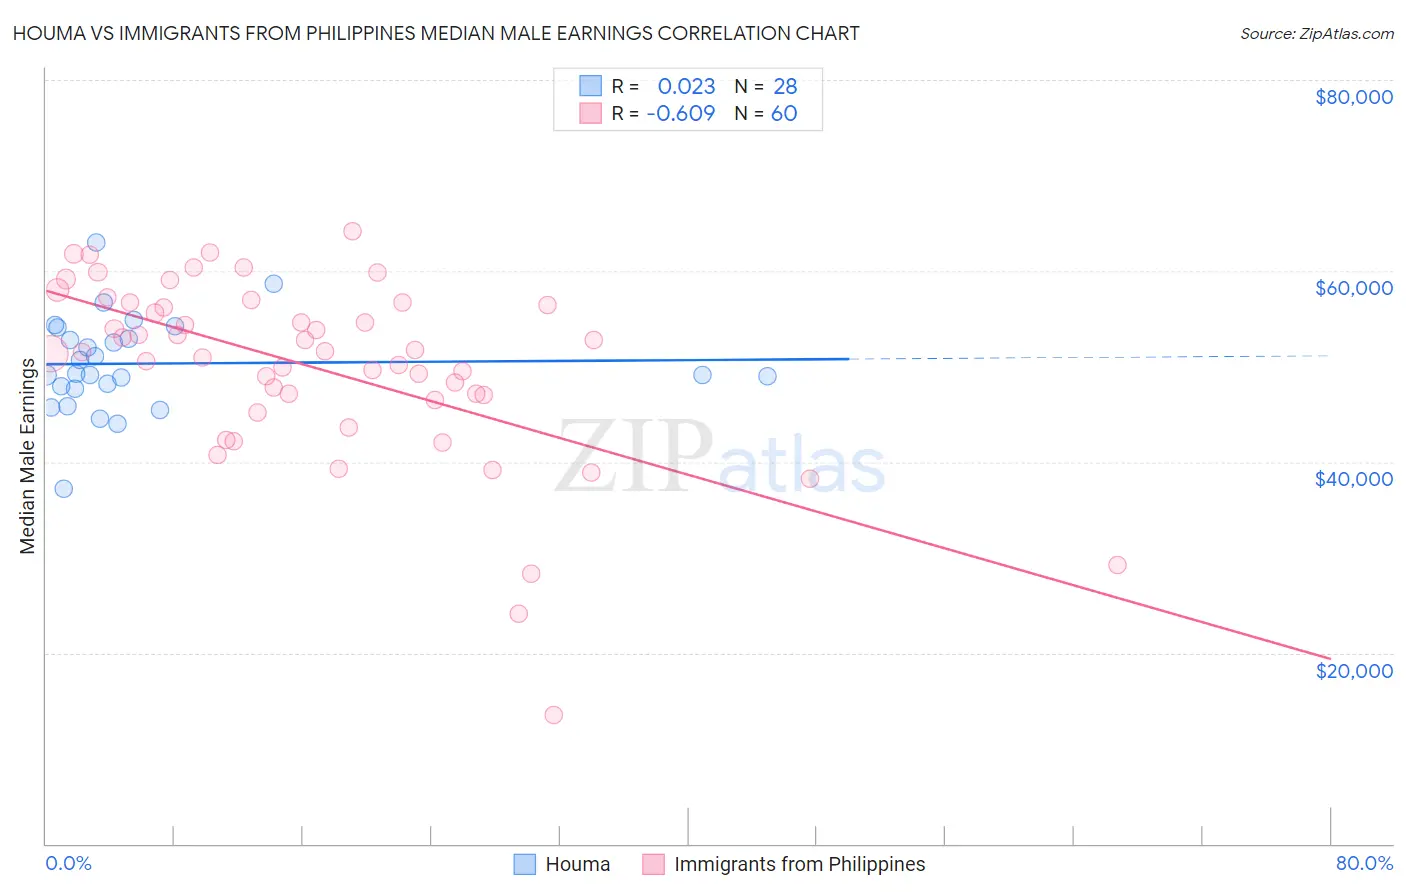 Houma vs Immigrants from Philippines Median Male Earnings